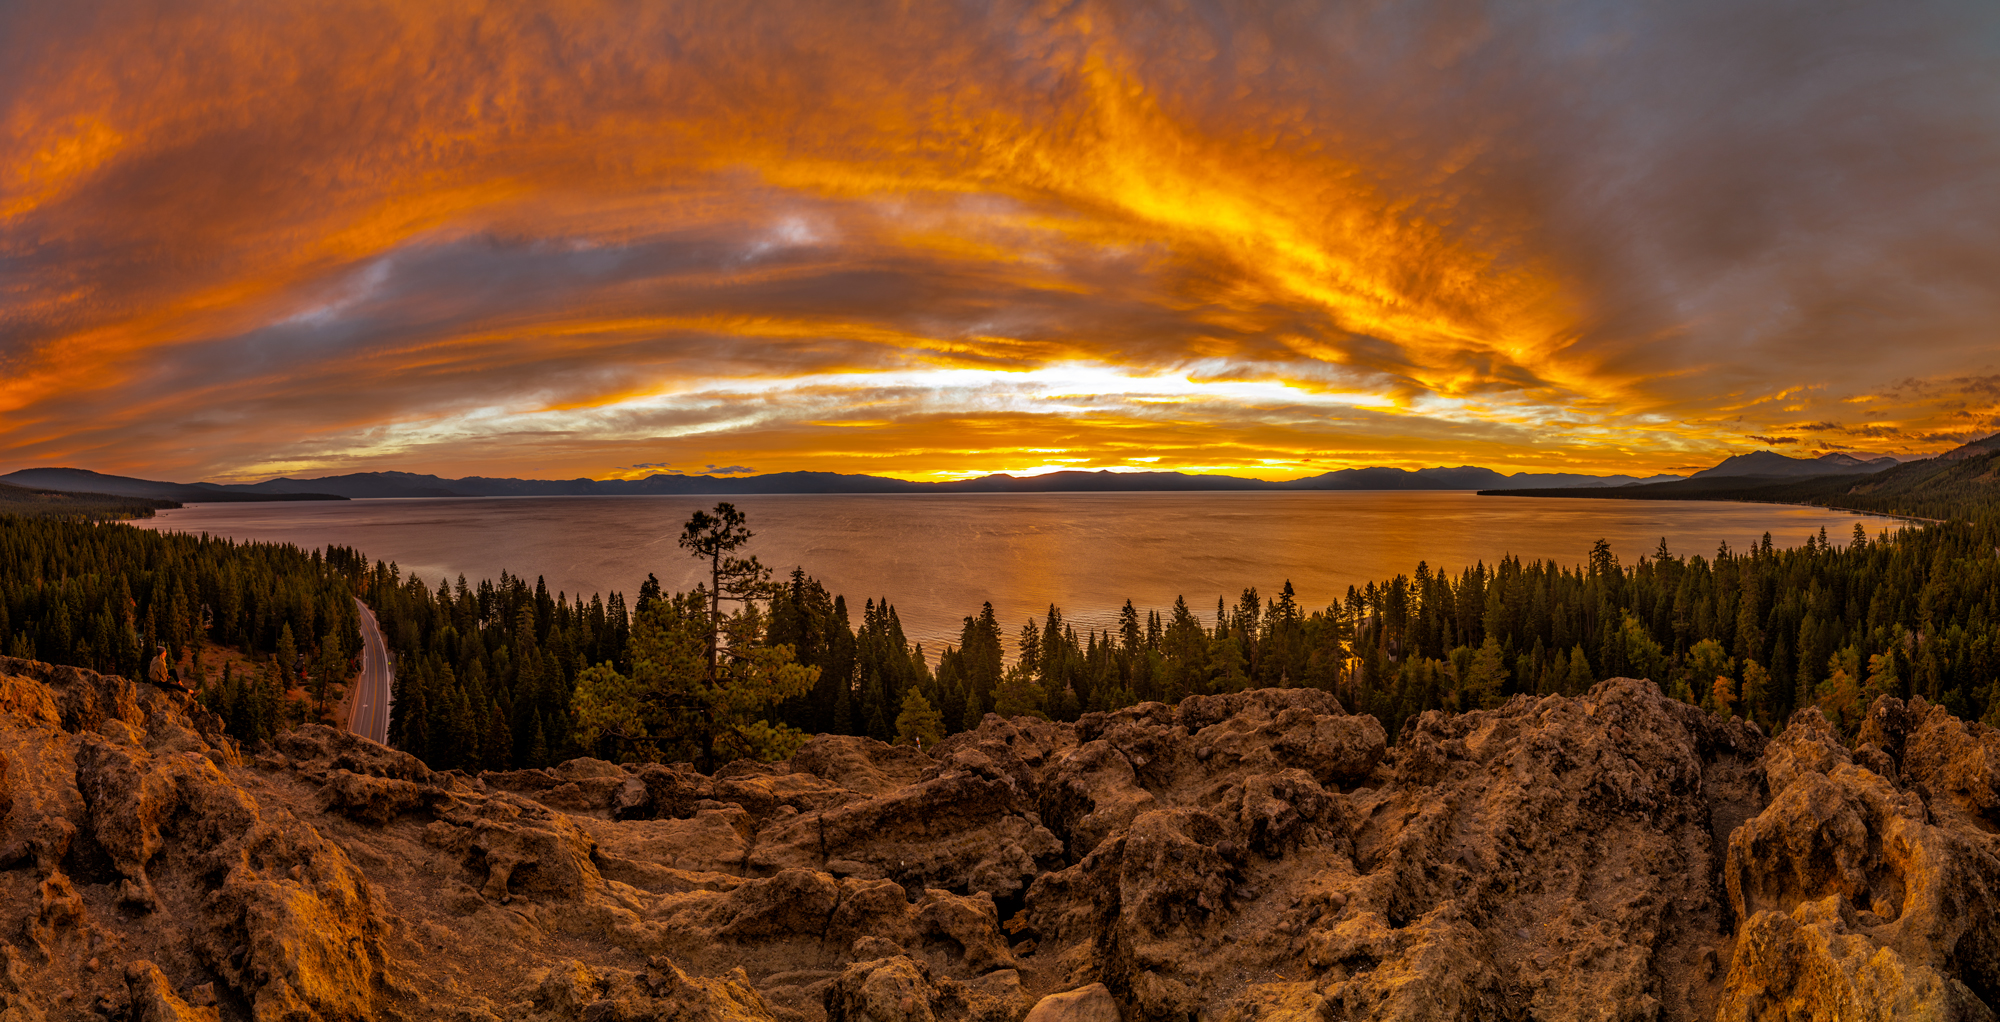 Lake Tahoe Tahoe National Forest San Harbor Sierras Panorama Fine Art Landscape Photography Mark Lilly